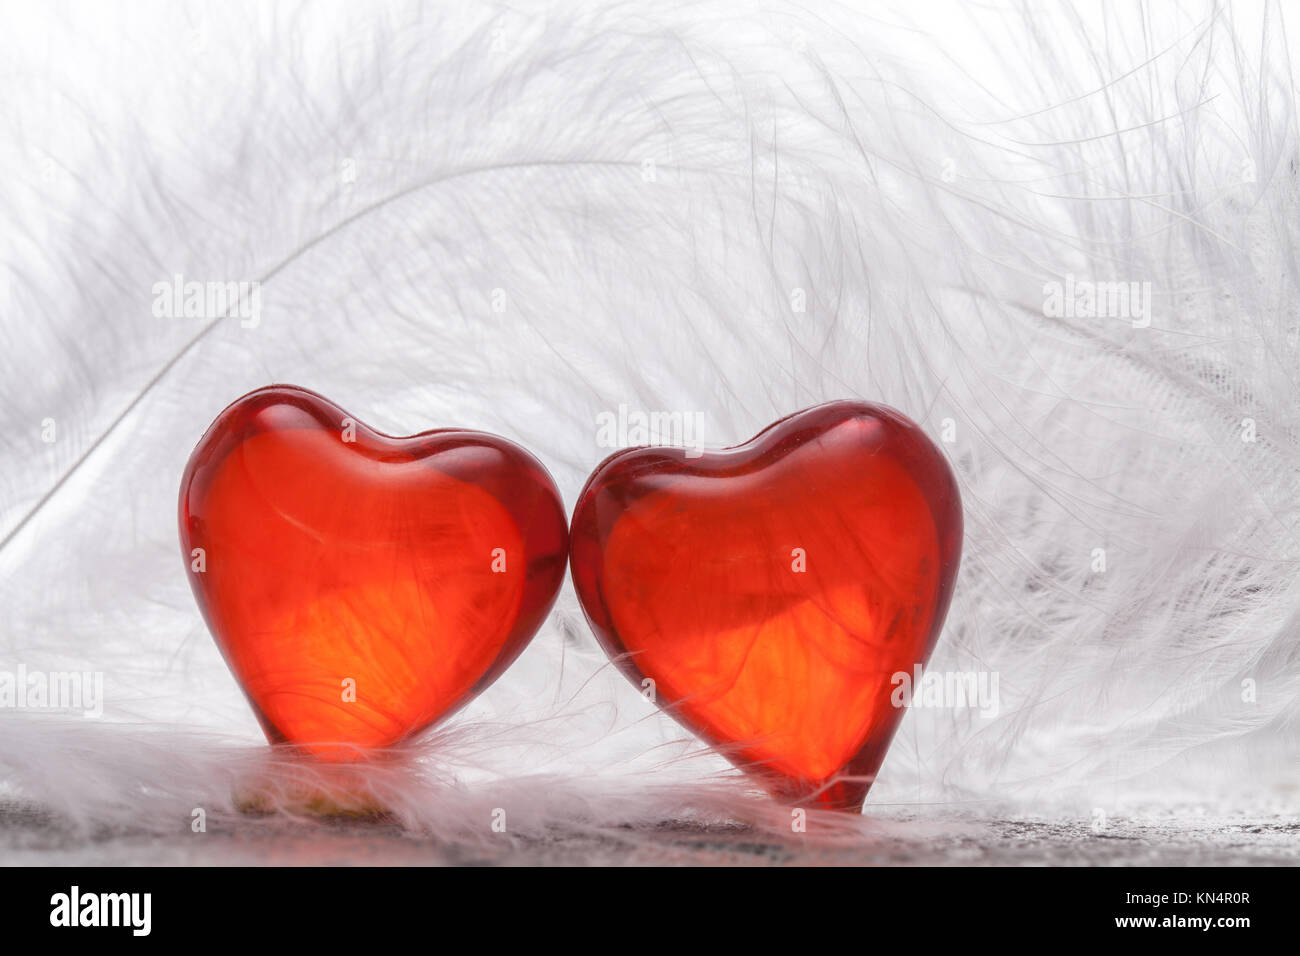 Red heart on a white feathers Stock Photo